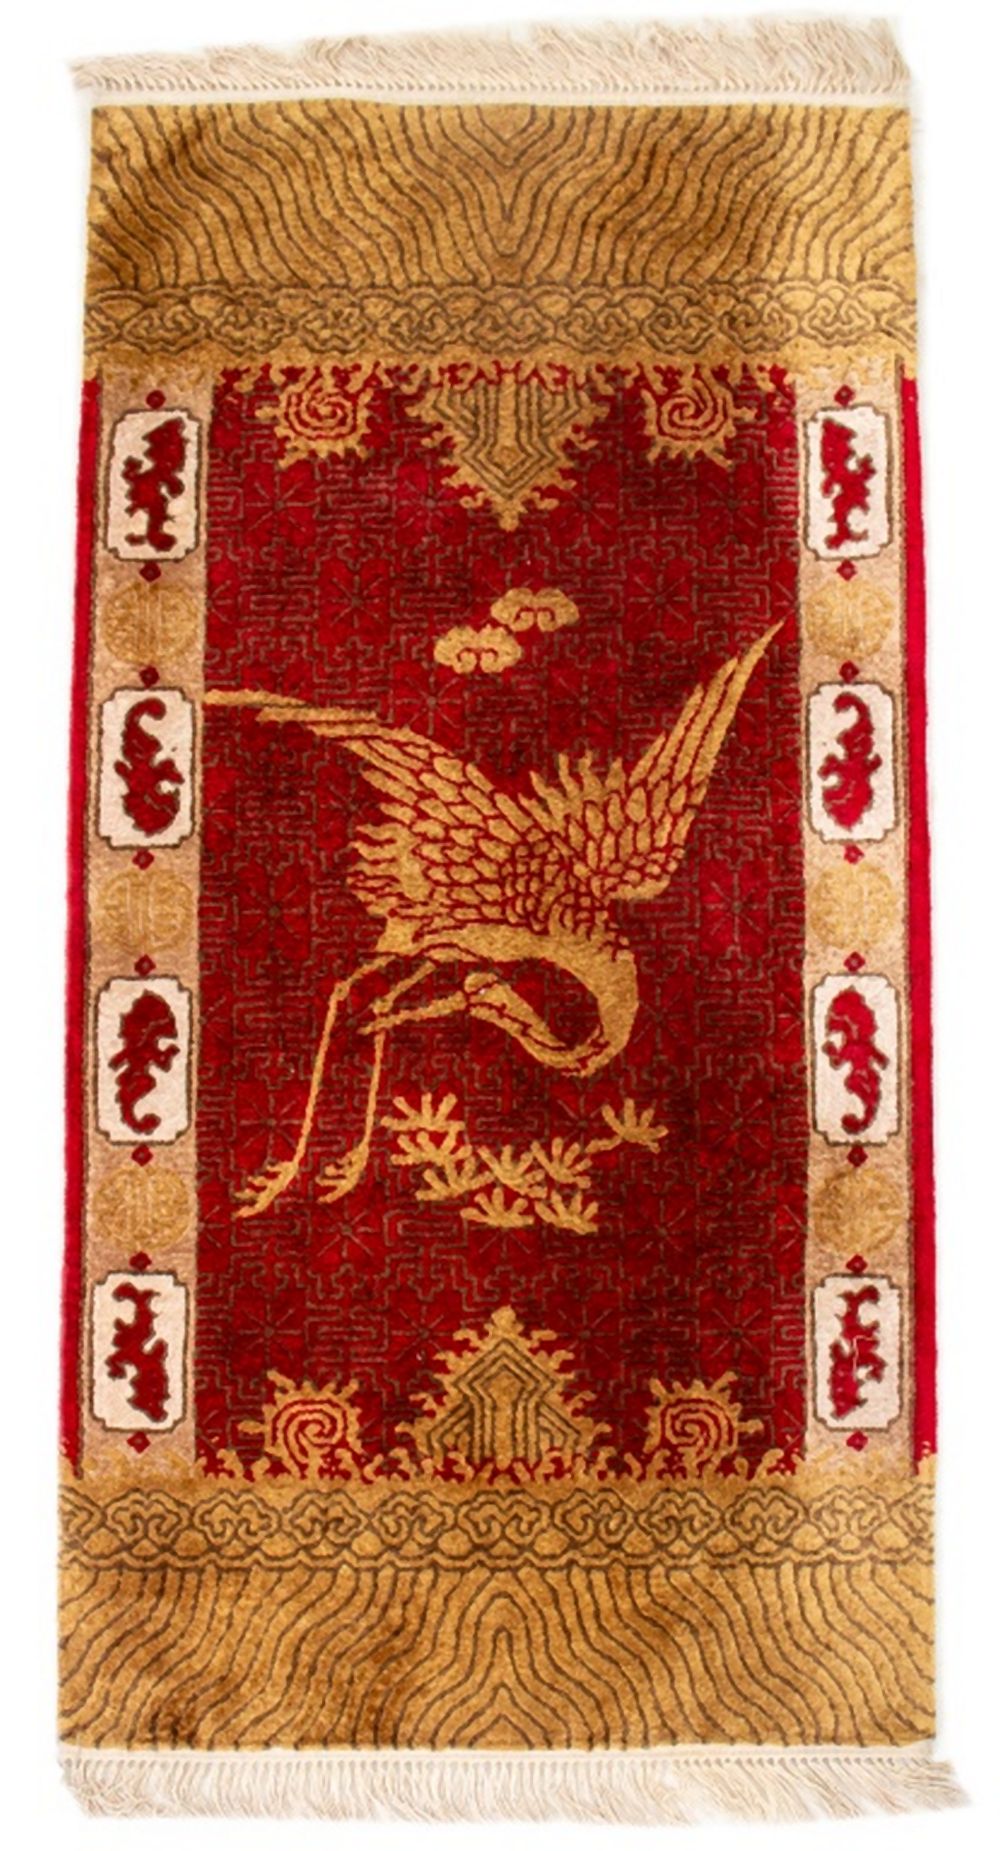 CHINESE RED CRANE RUG 4 2 X 3cec59